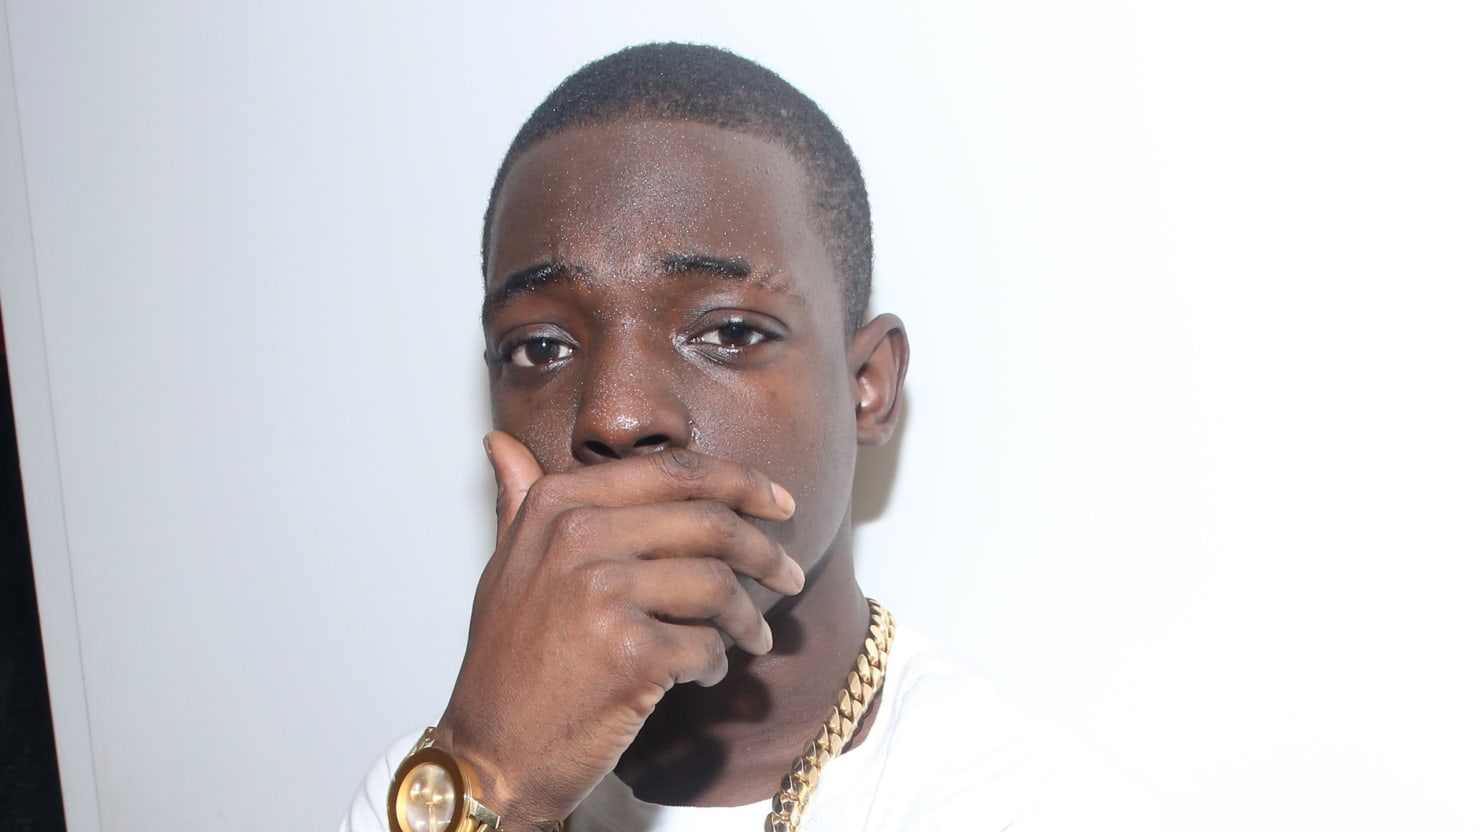 Bobby Shmurda Clowns Rappers Posing With Guns in Videos: “Y’all Ain’t Using Them Anyway”